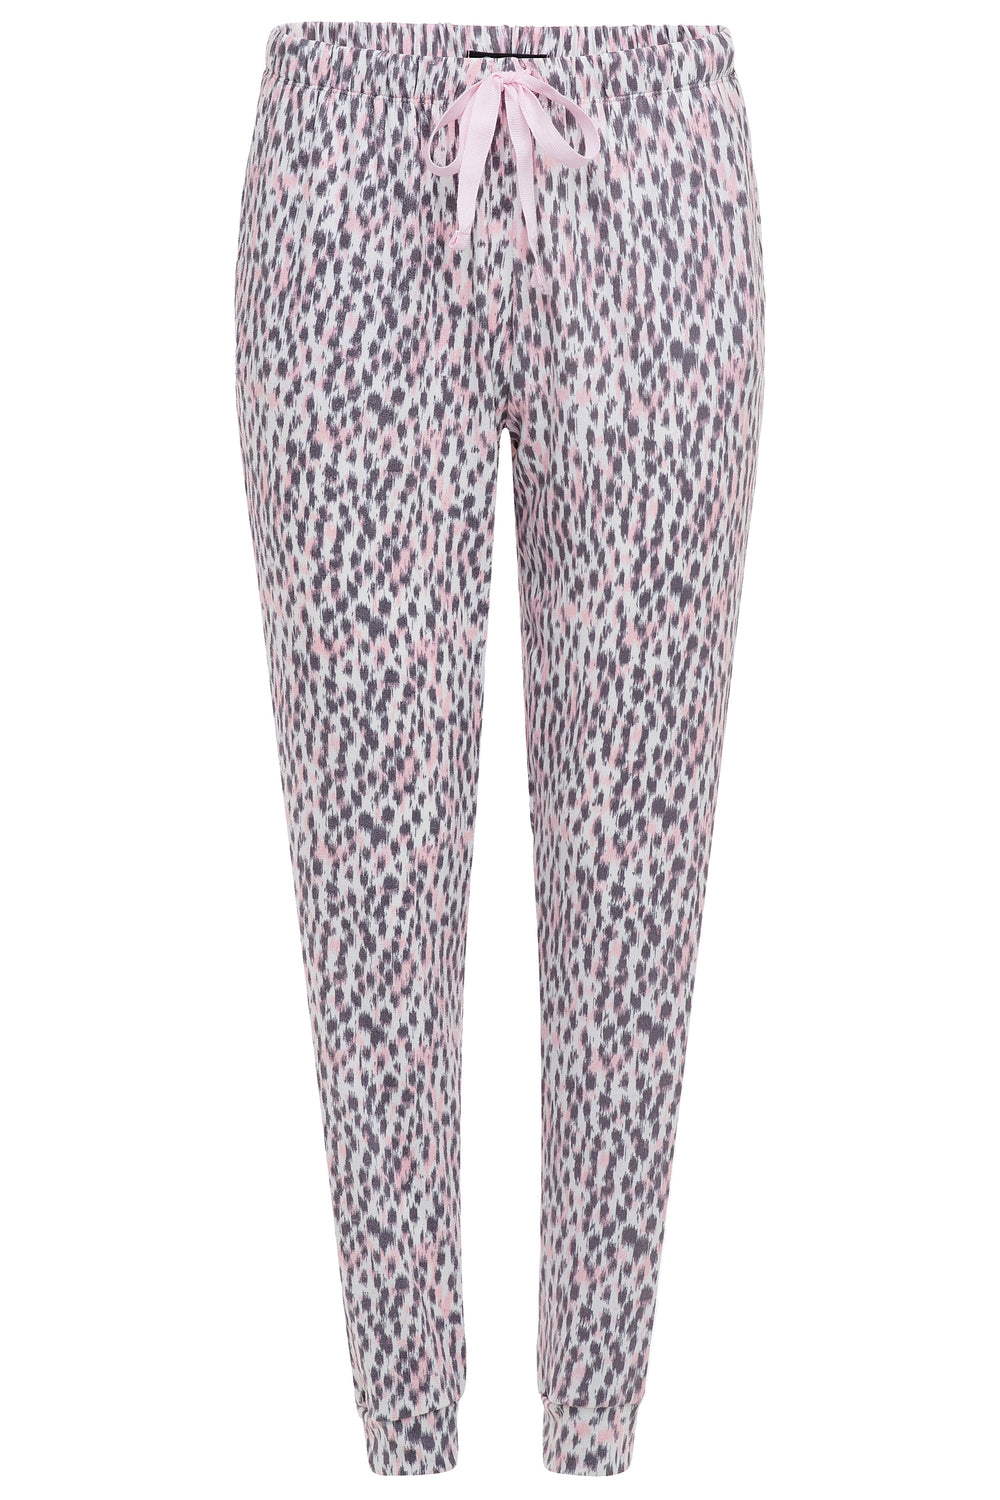 Animal patterned pants as part of the 2 Pack René Rofé Lightweight Hacci Jogger Pajama Pants in Hearts and Animal pattern